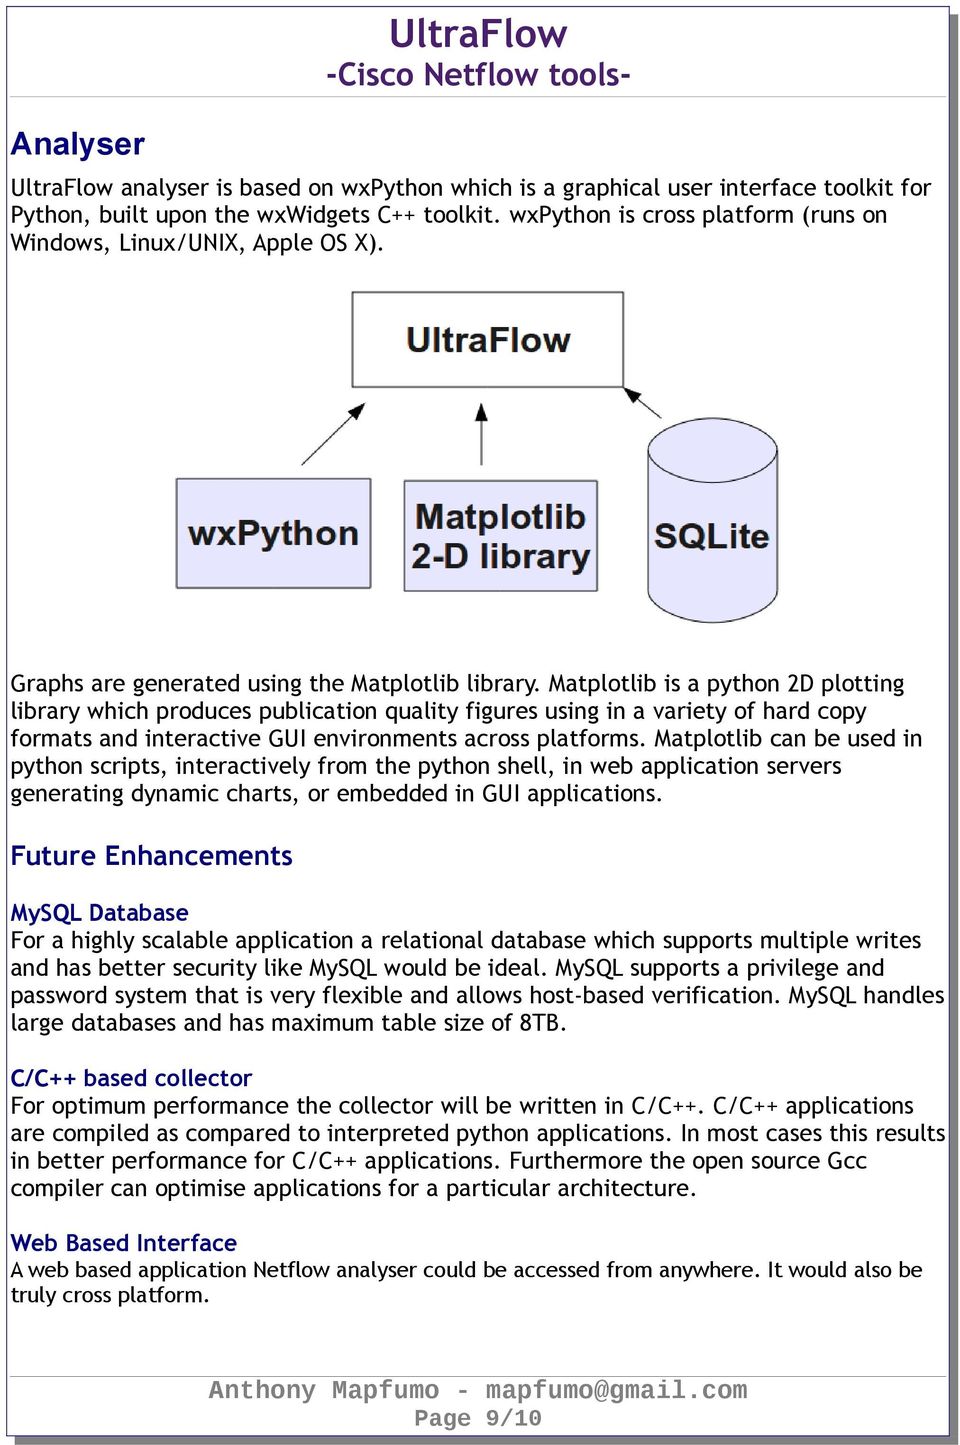 Matplotlib is a python 2D plotting library which produces publication quality figures using in a variety of hard copy formats and interactive GUI environments across platforms.